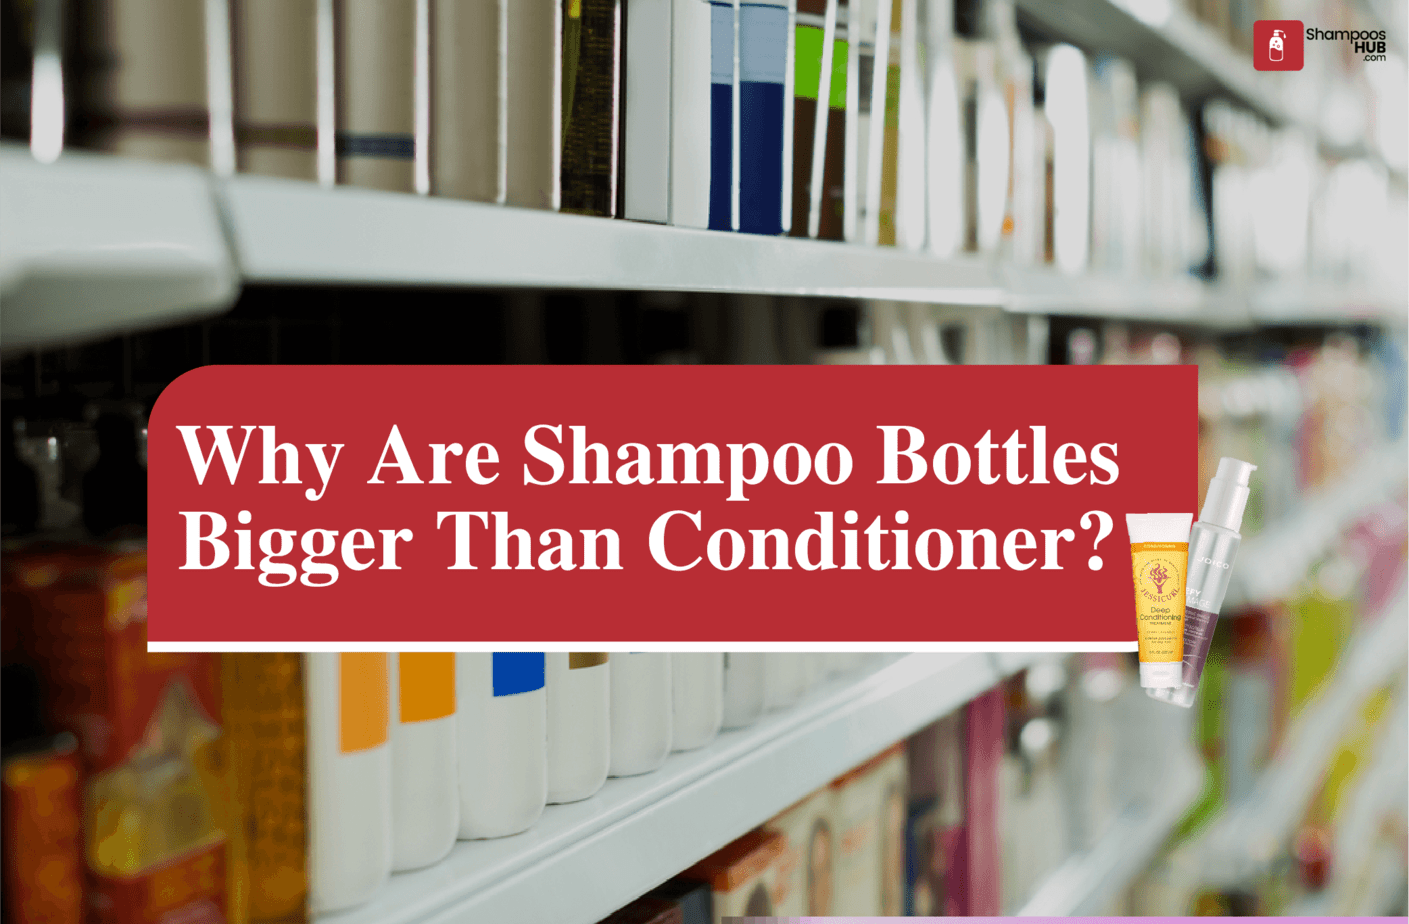 Why Are Shampoo Bottles Bigger Than Conditioner?